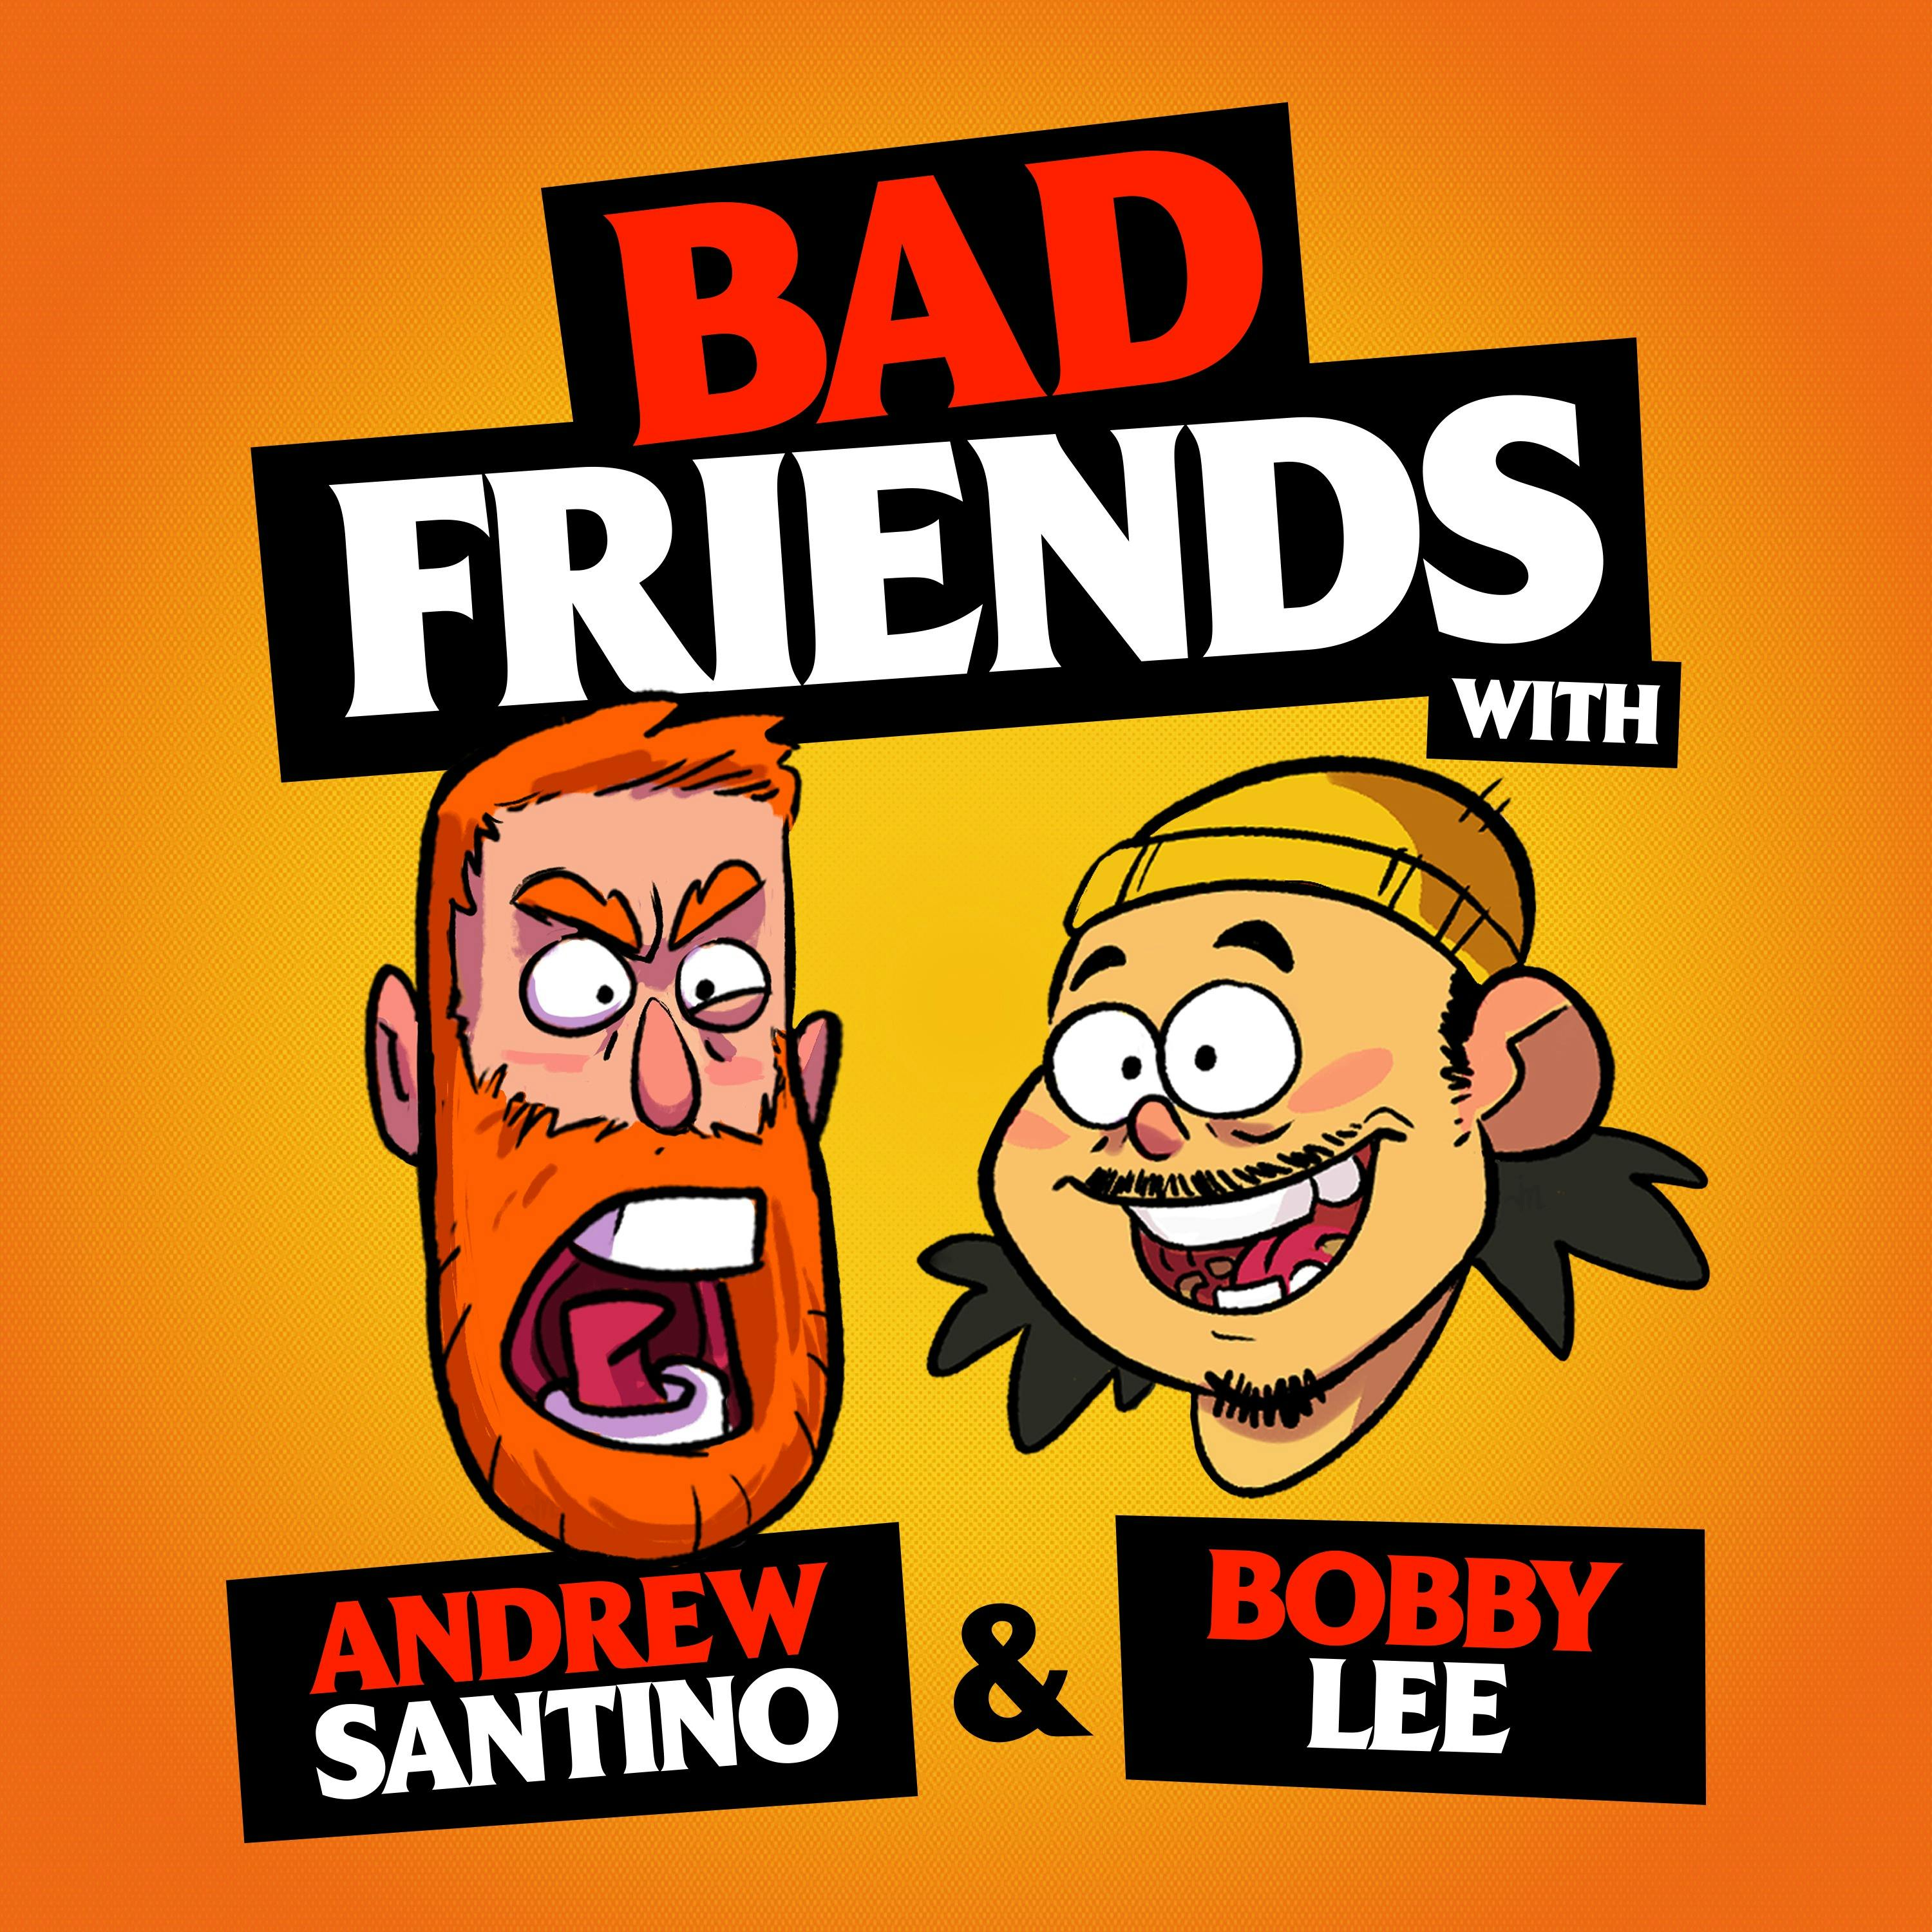 Rudy's Getting Kicked Out by Andrew Santino and Bobby Lee